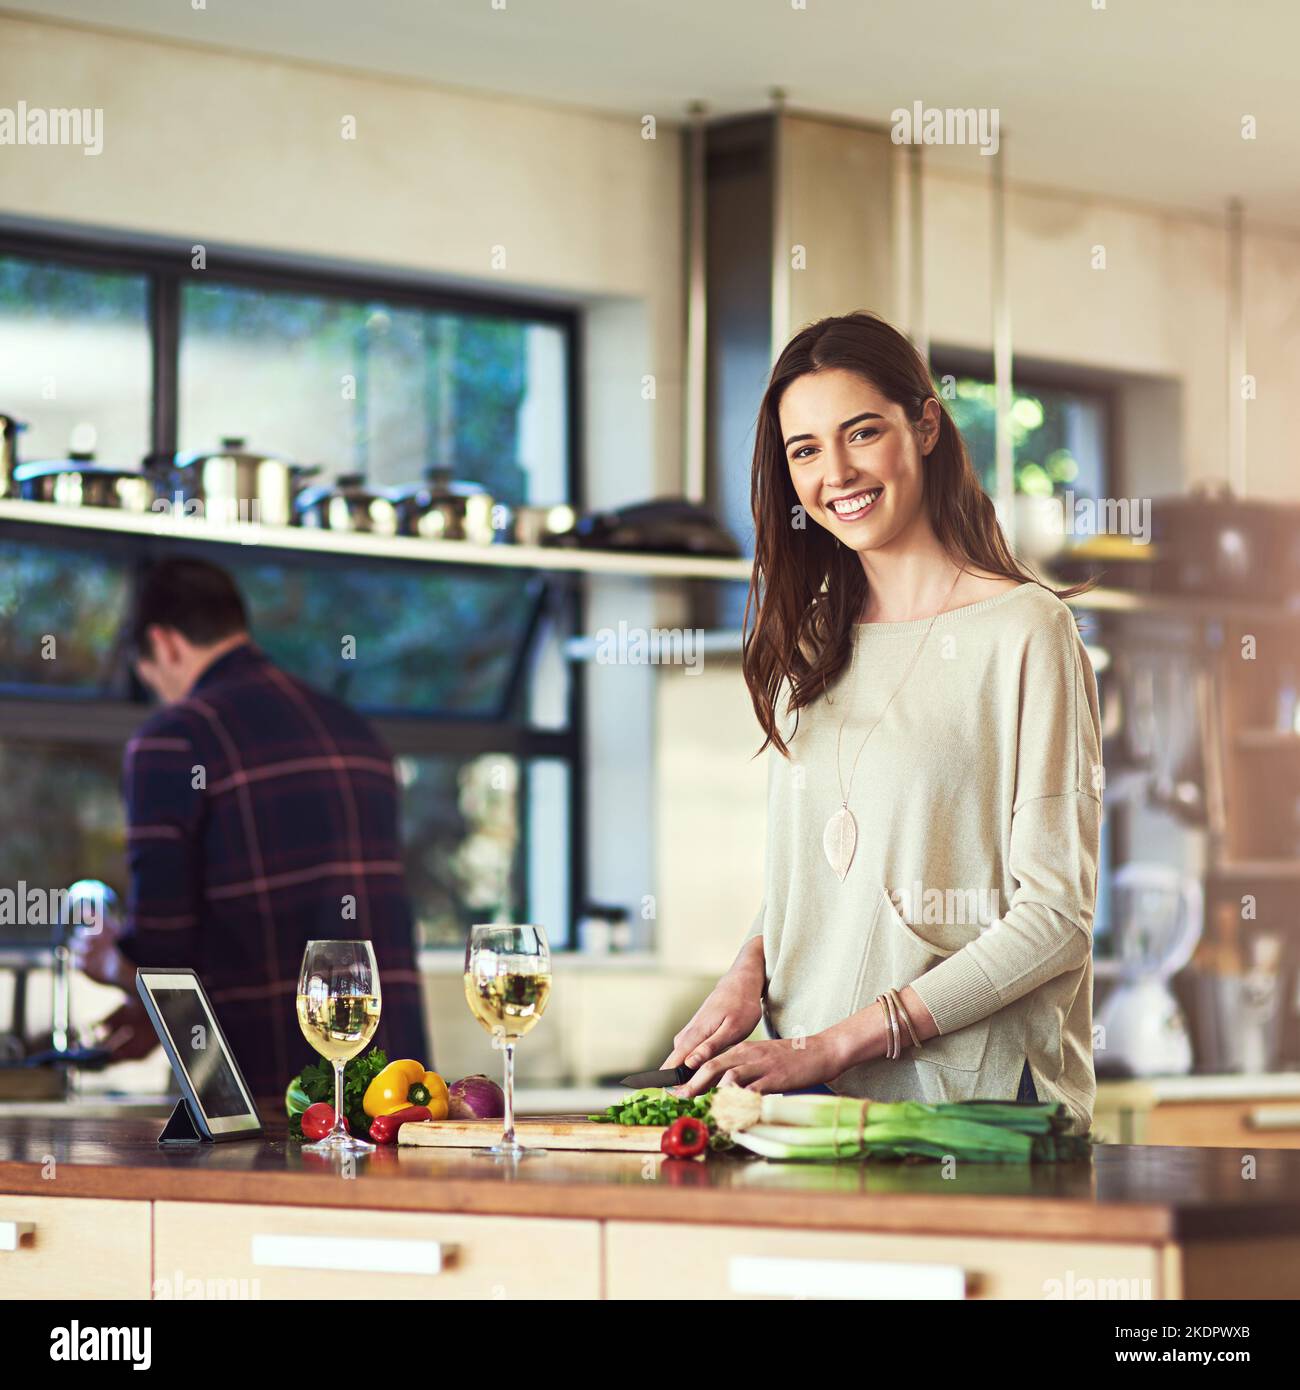 Nothing better than a hearty home cooked meal. Portrait of a young woman preparing a meal with her boyfriend in the background at home. Stock Photo